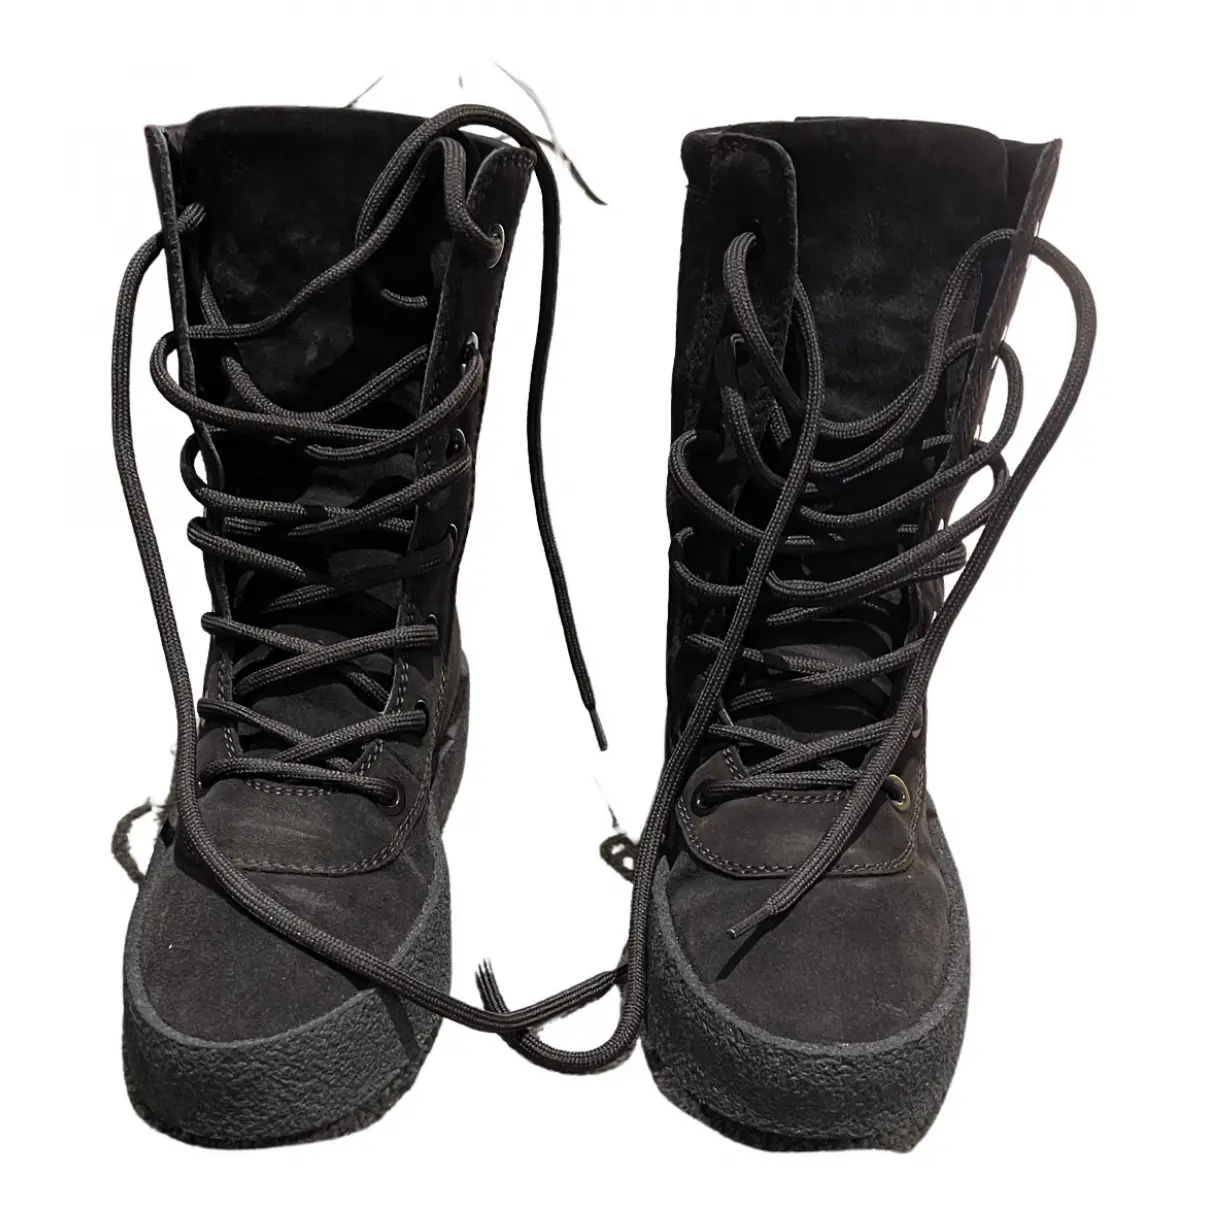 Riding boots Yeezy